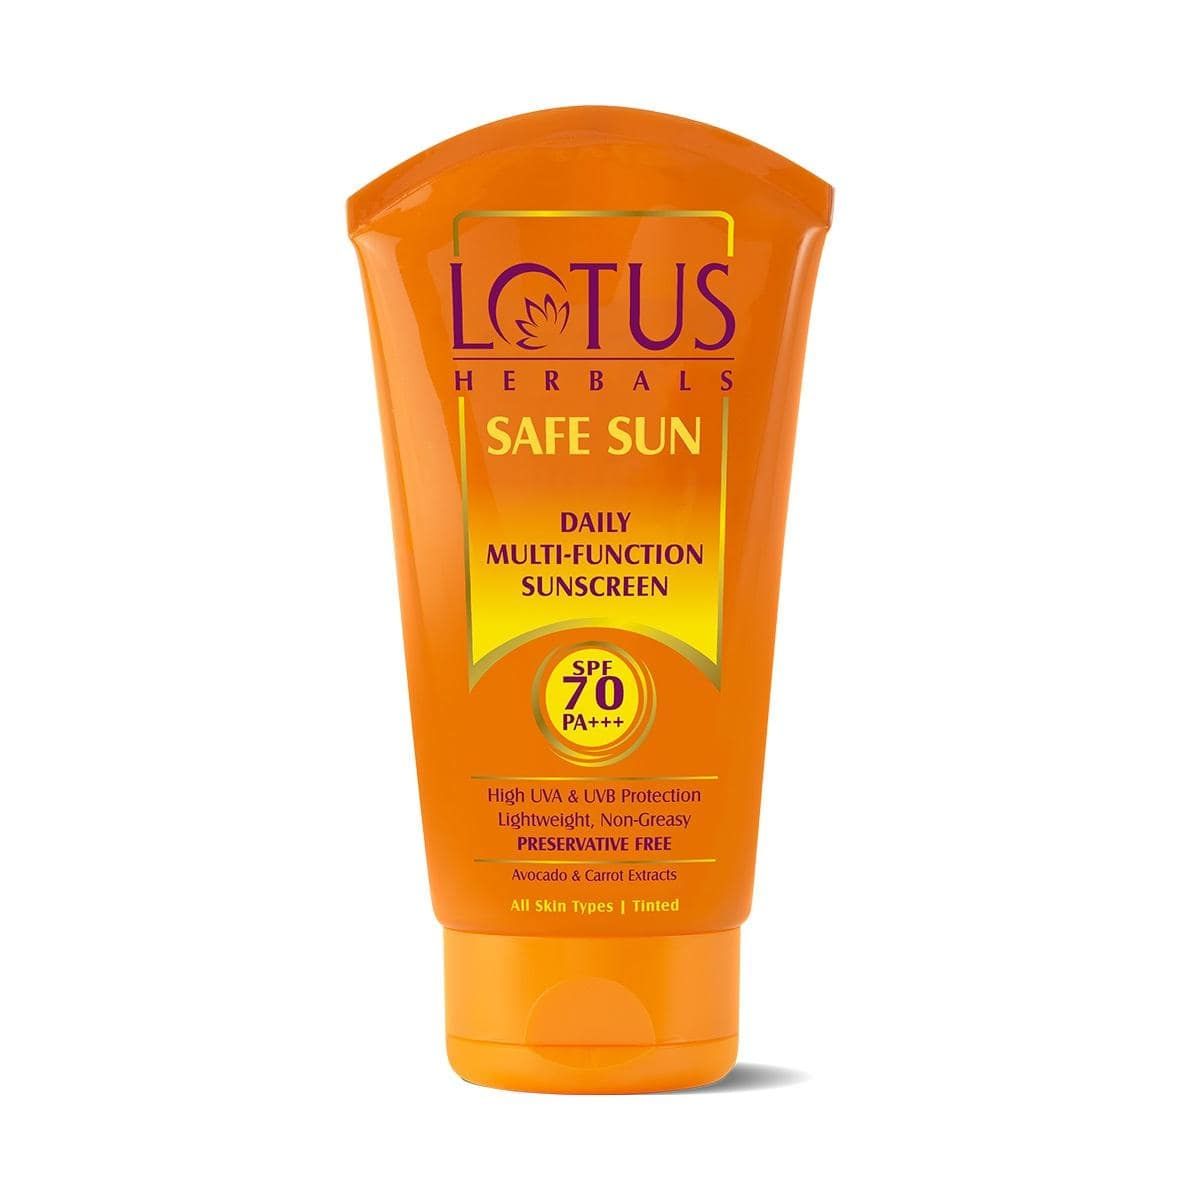 Buy Lotus Herbals Safe Sun Sunscreen - Daily Multi-Function Sunscreen | SPF 70 | PA+++ | Preservative Free | Oil Free | 60g - Purplle